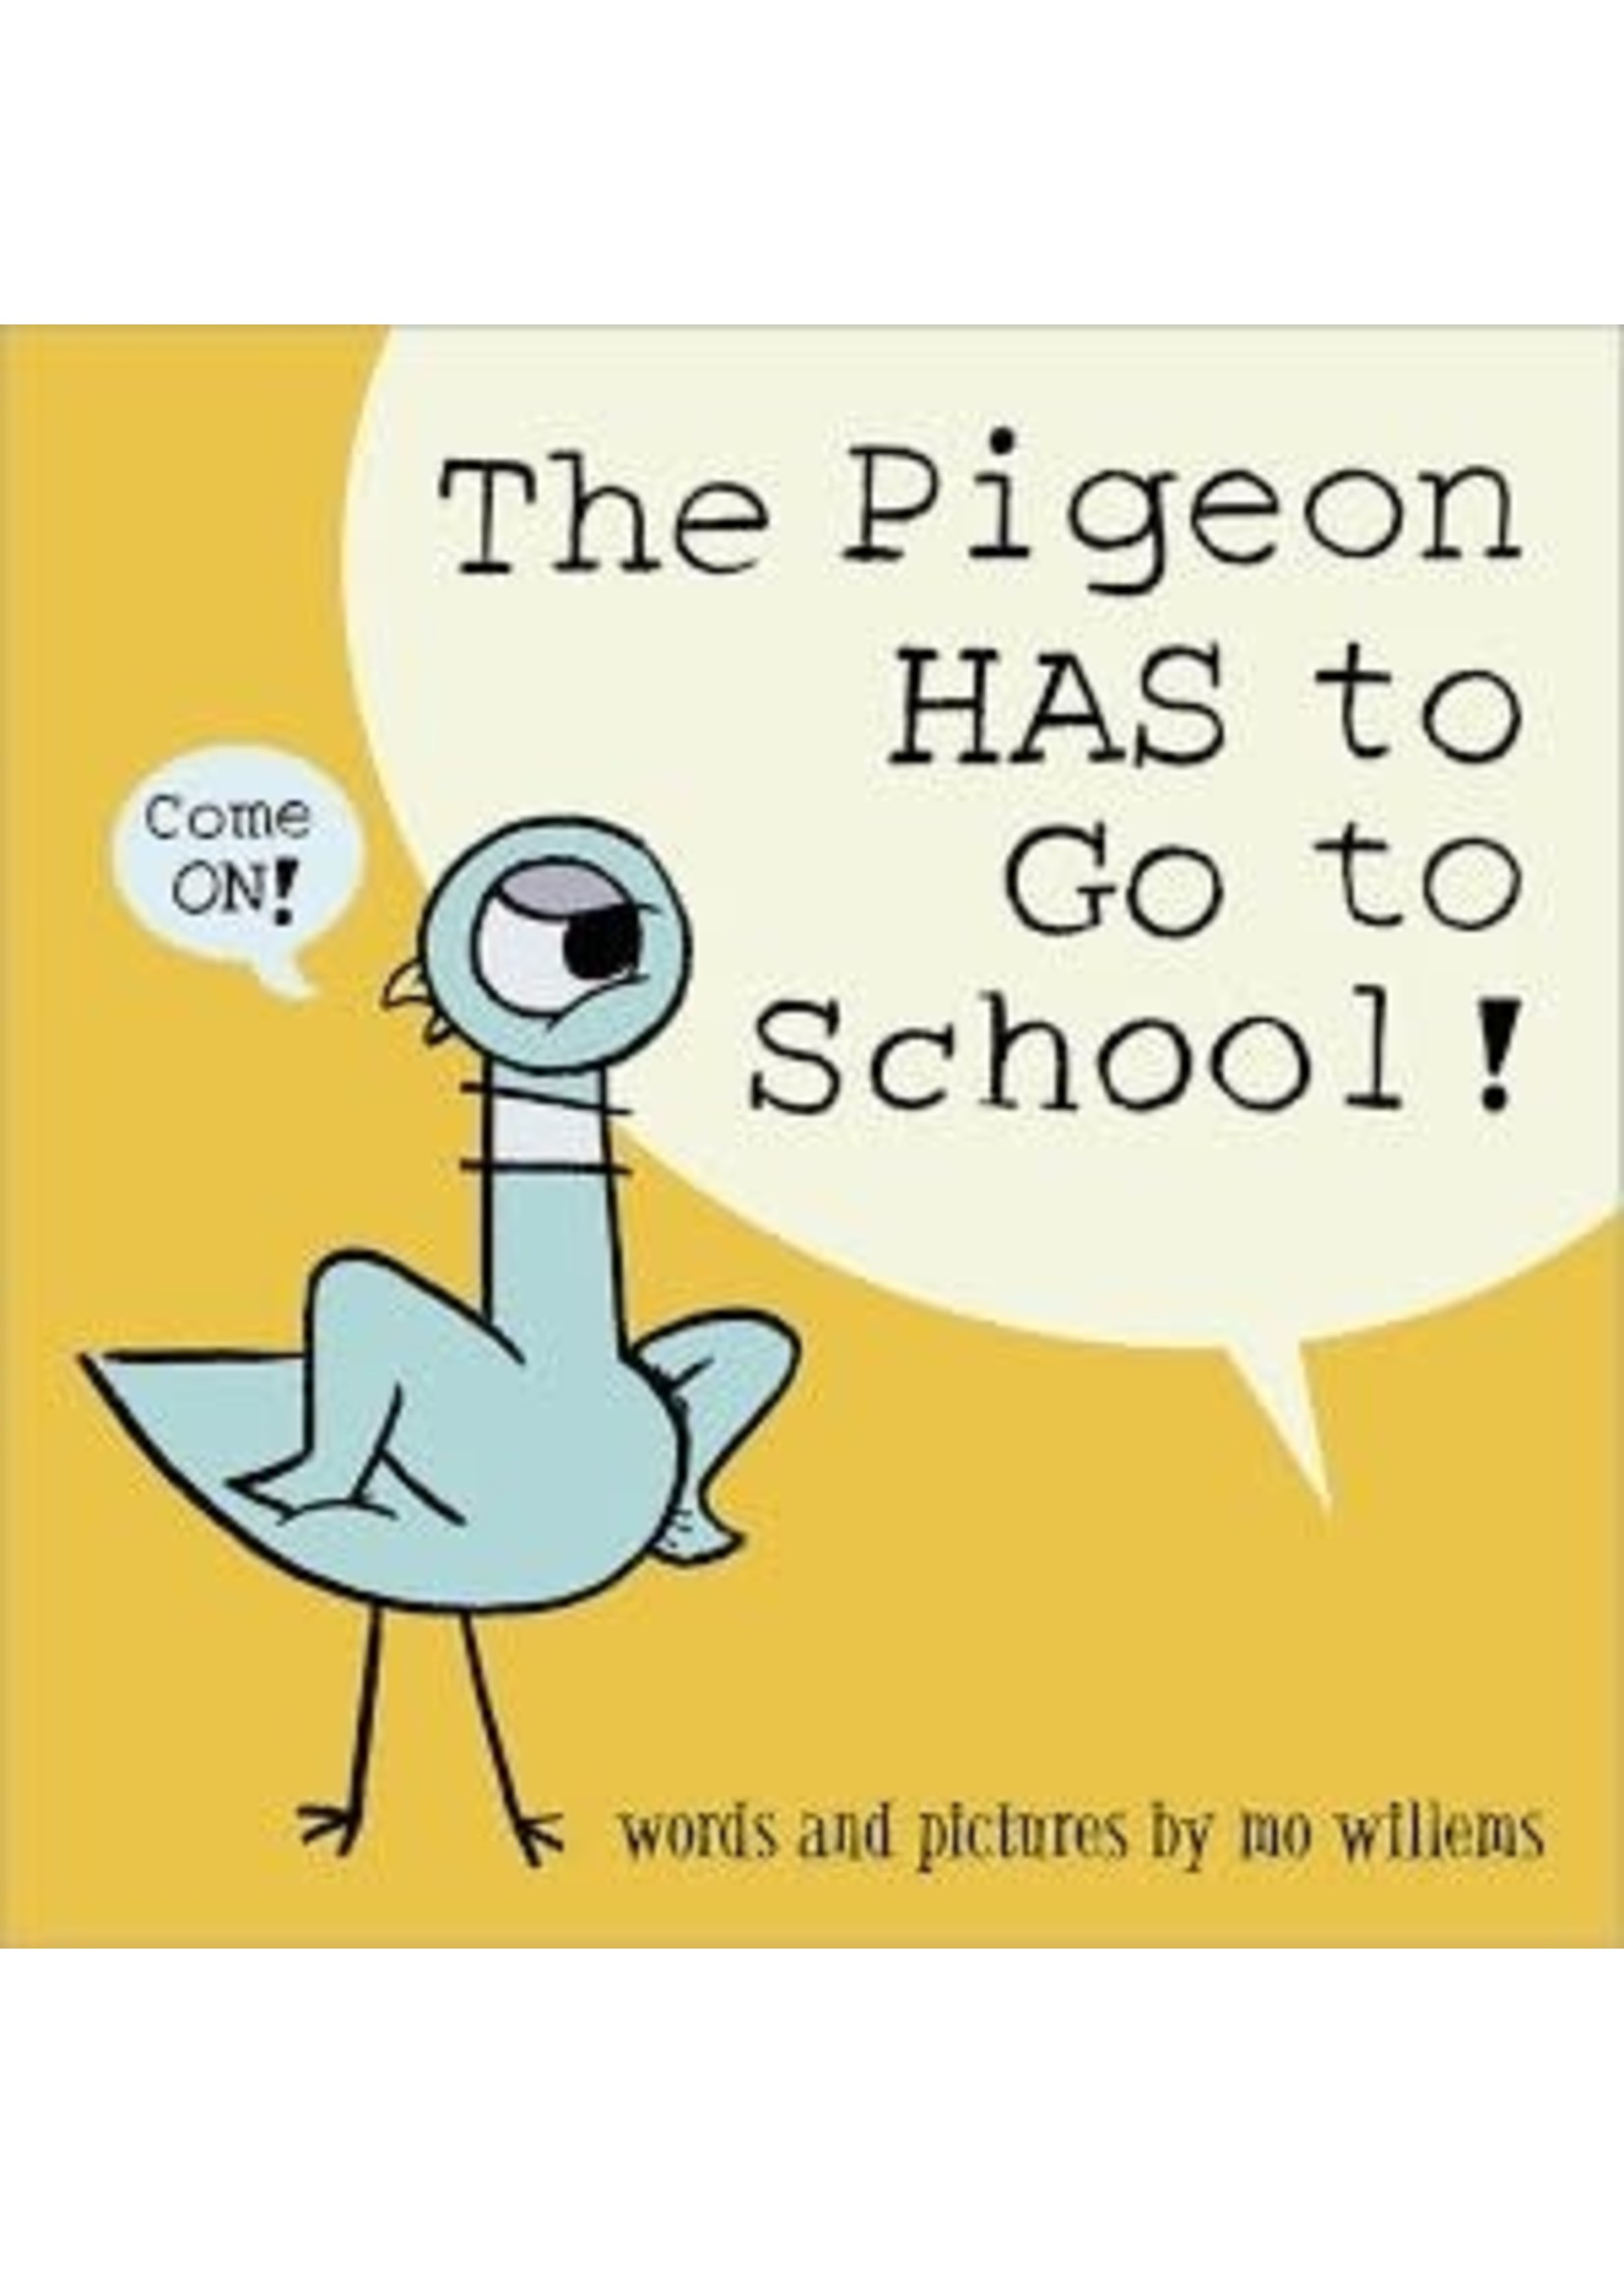 The Pigeon Has to Go to School by Mo Willems